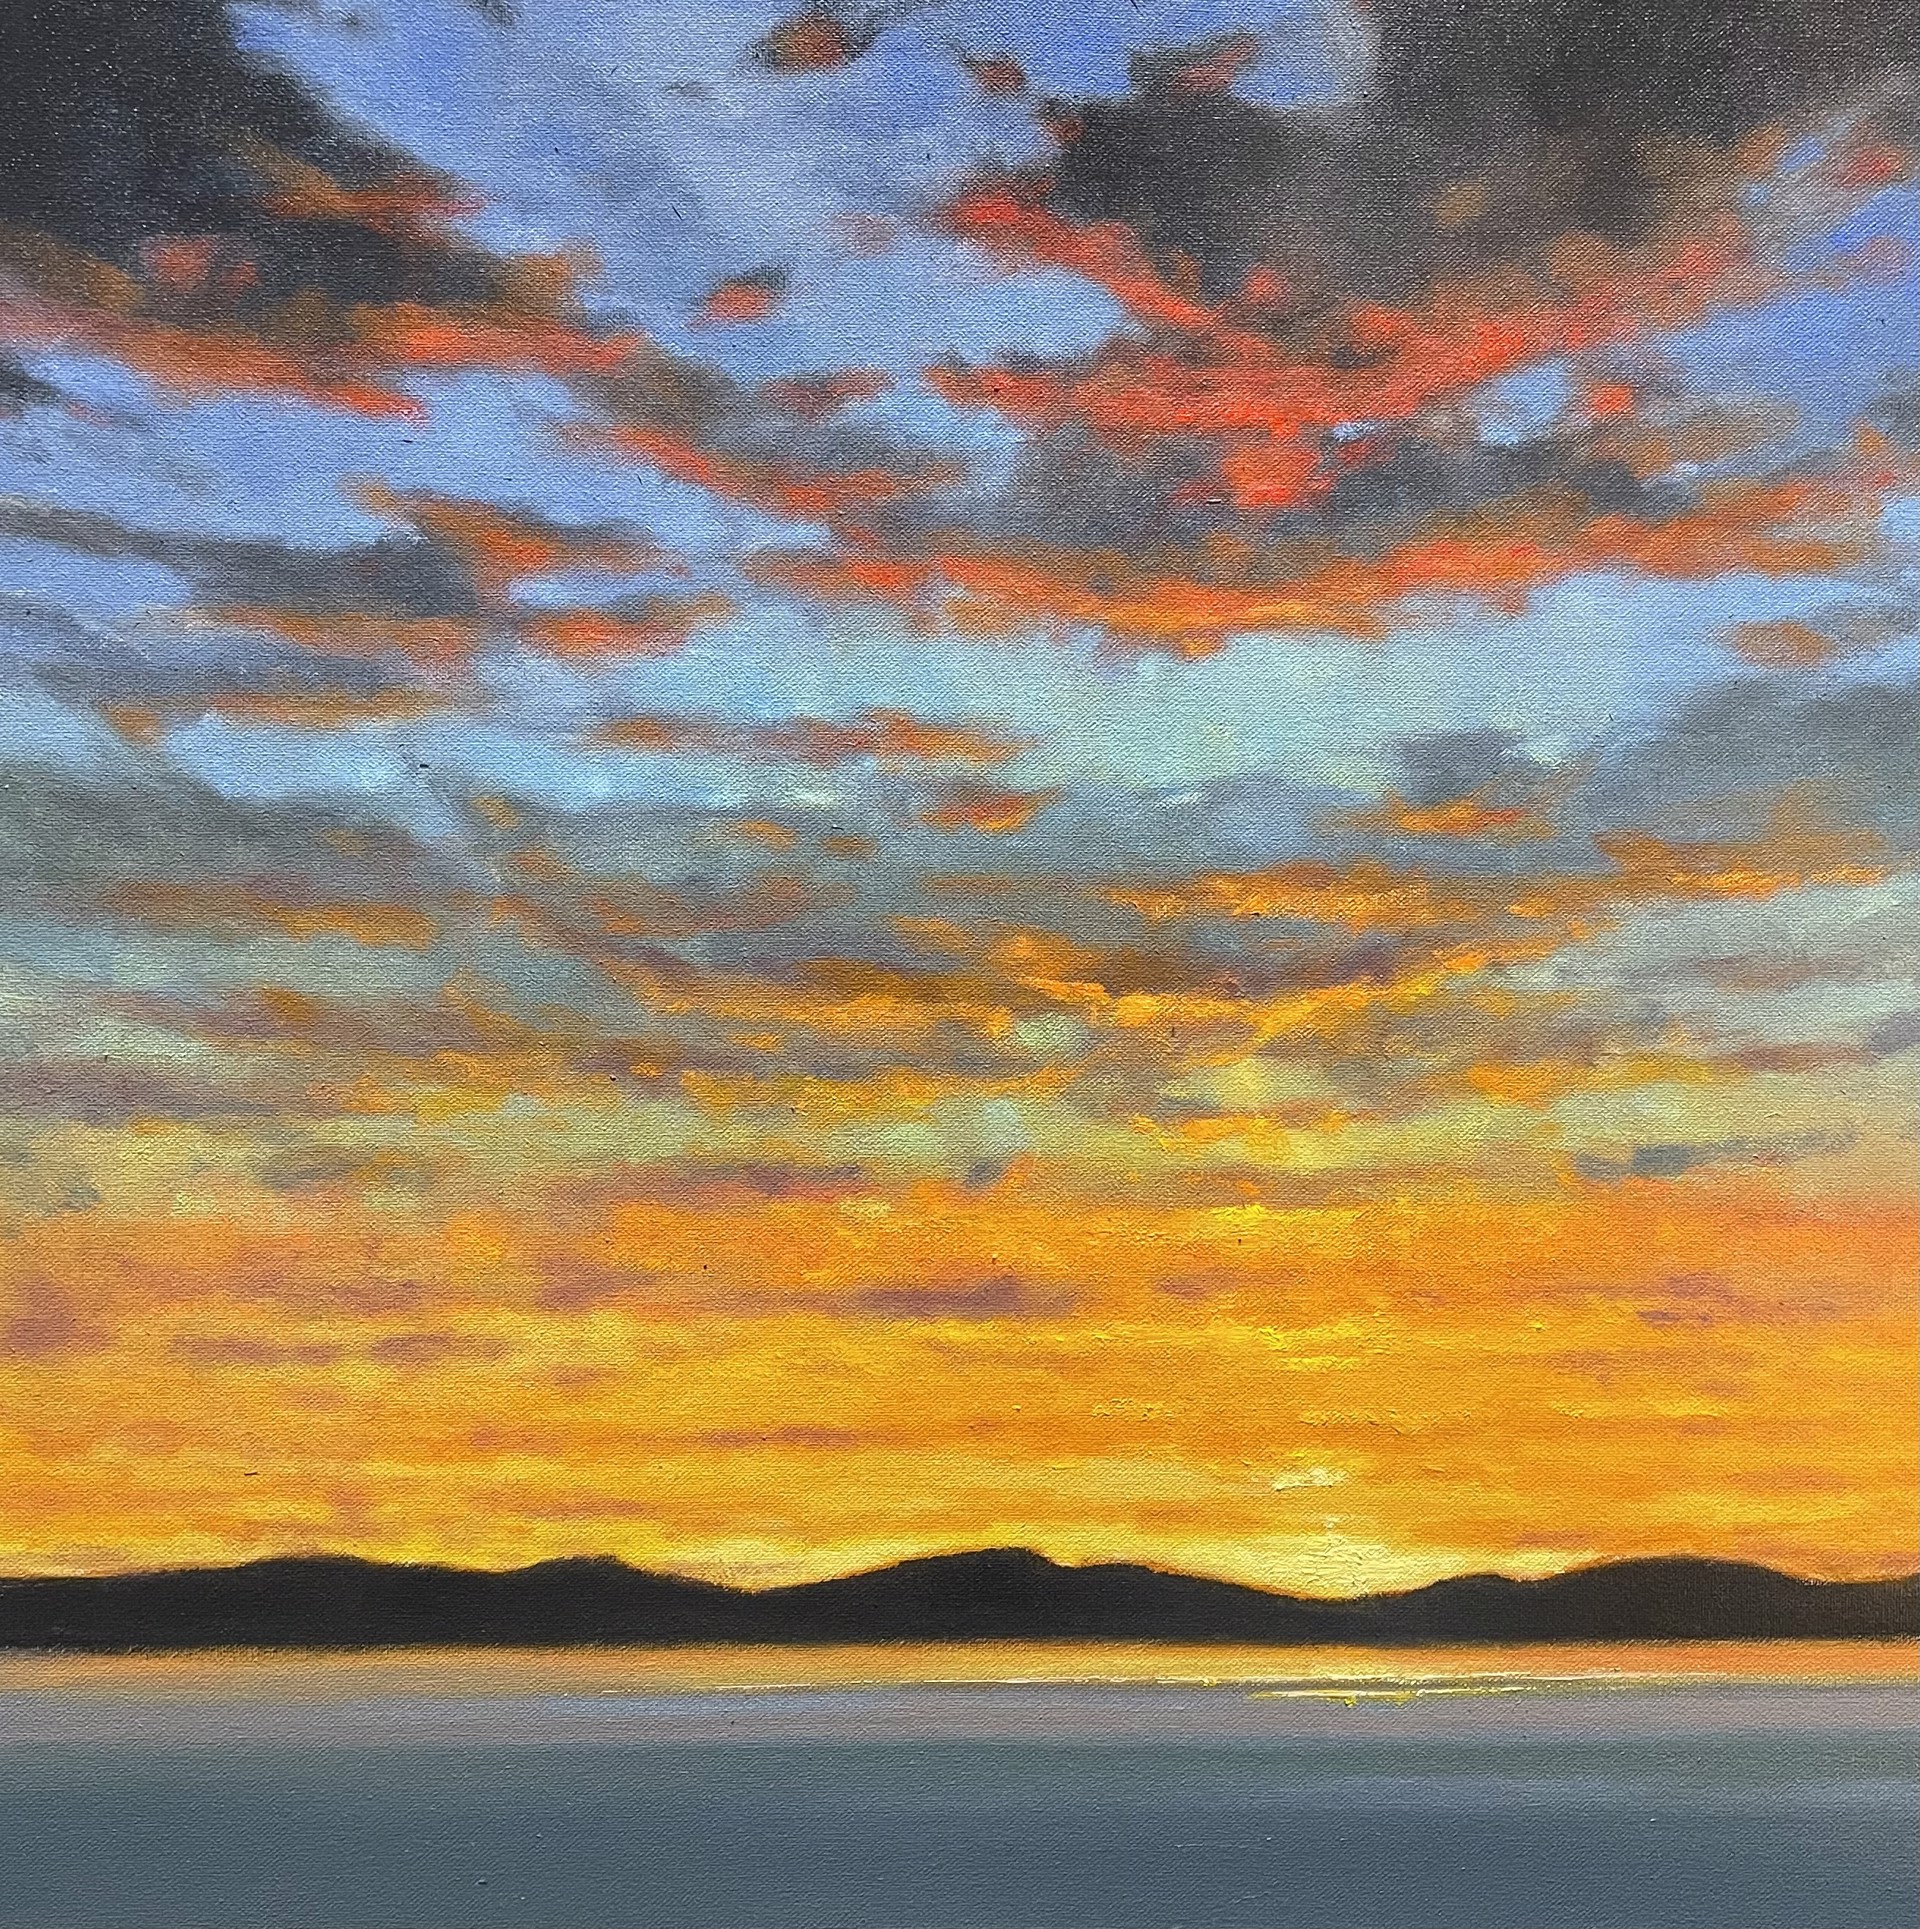 SUNSET STUDY by Mark Gibson